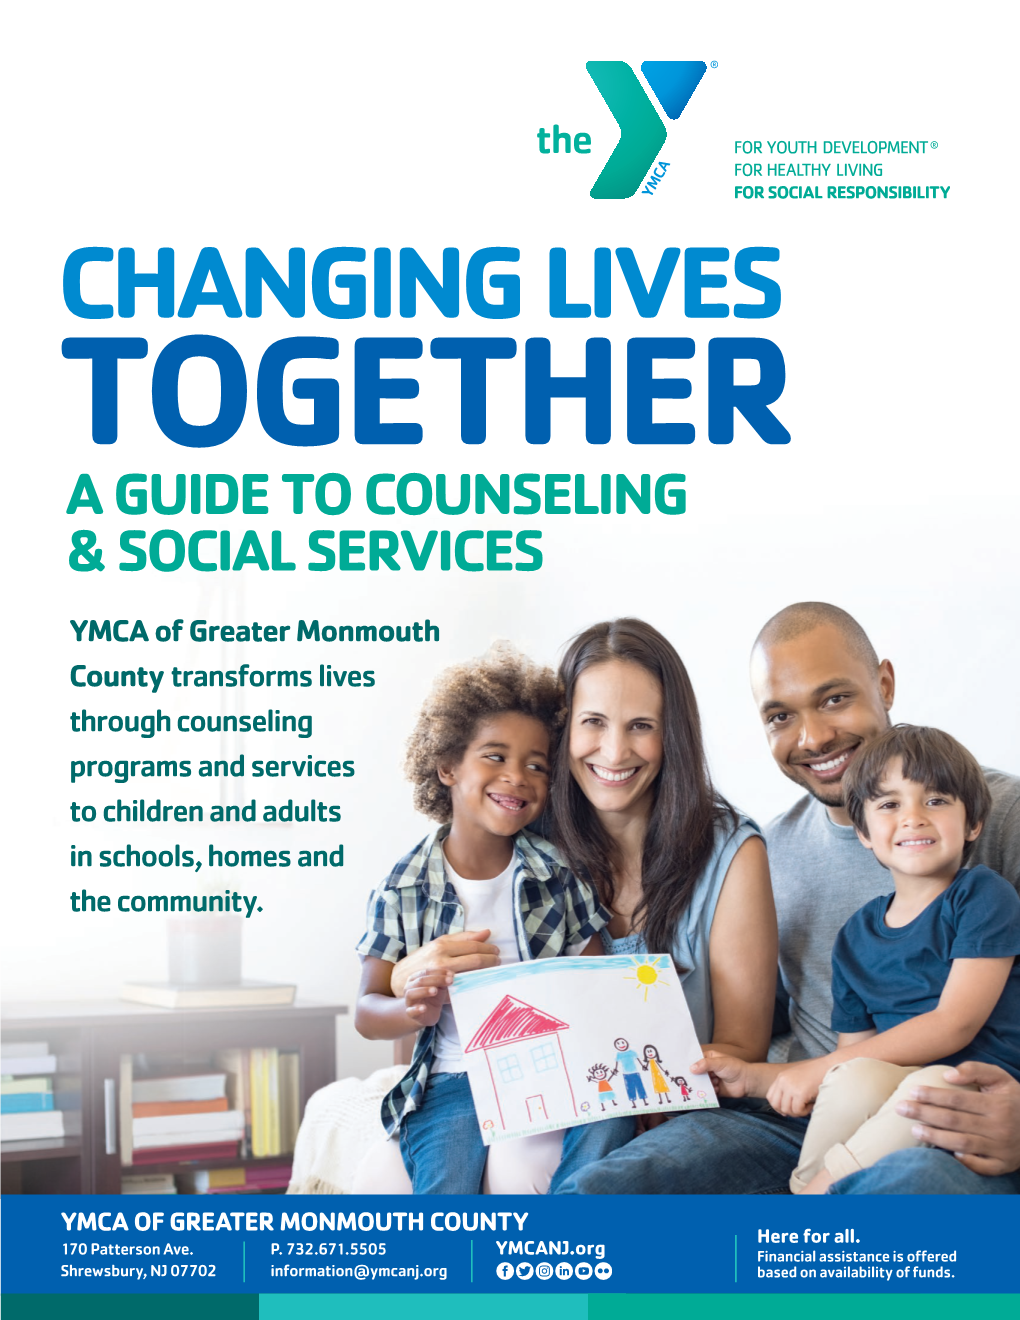 Changing Lives Together a Guide to Counseling & Social Services